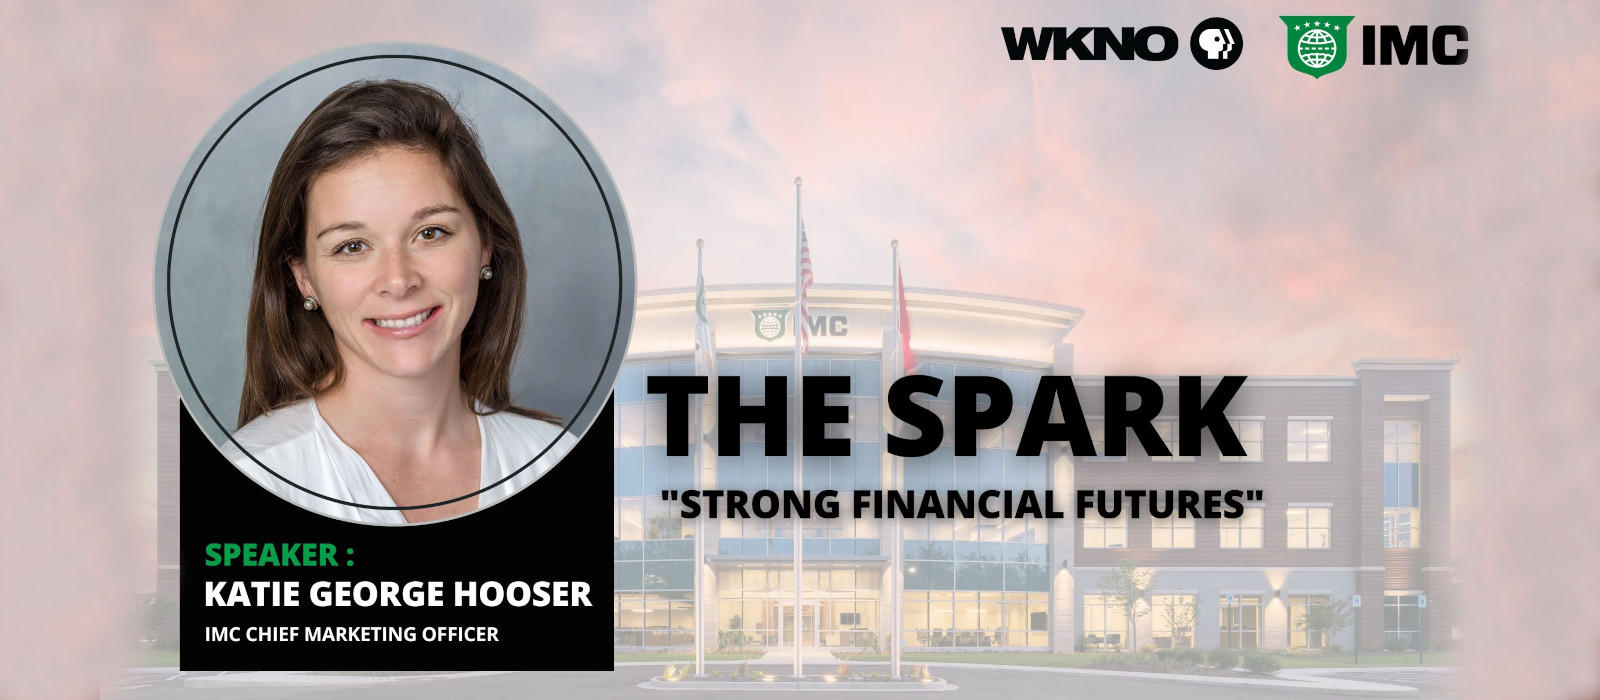 The SPARK talks with Katie Hooser, CMO of IMC